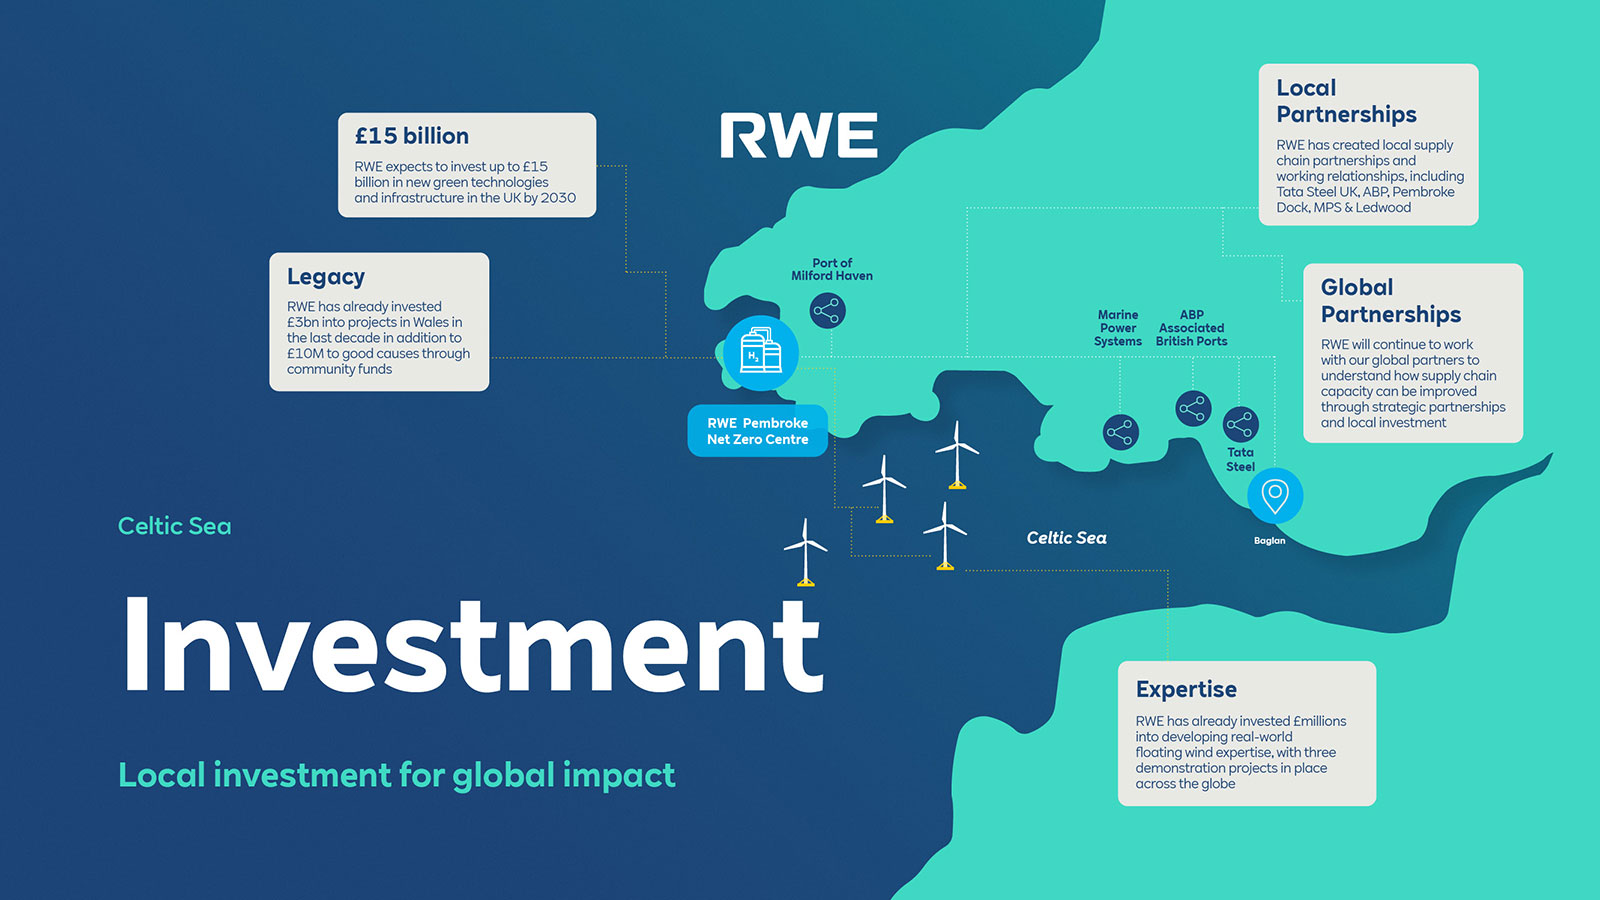 Investment | RWE in the Celtic Sea